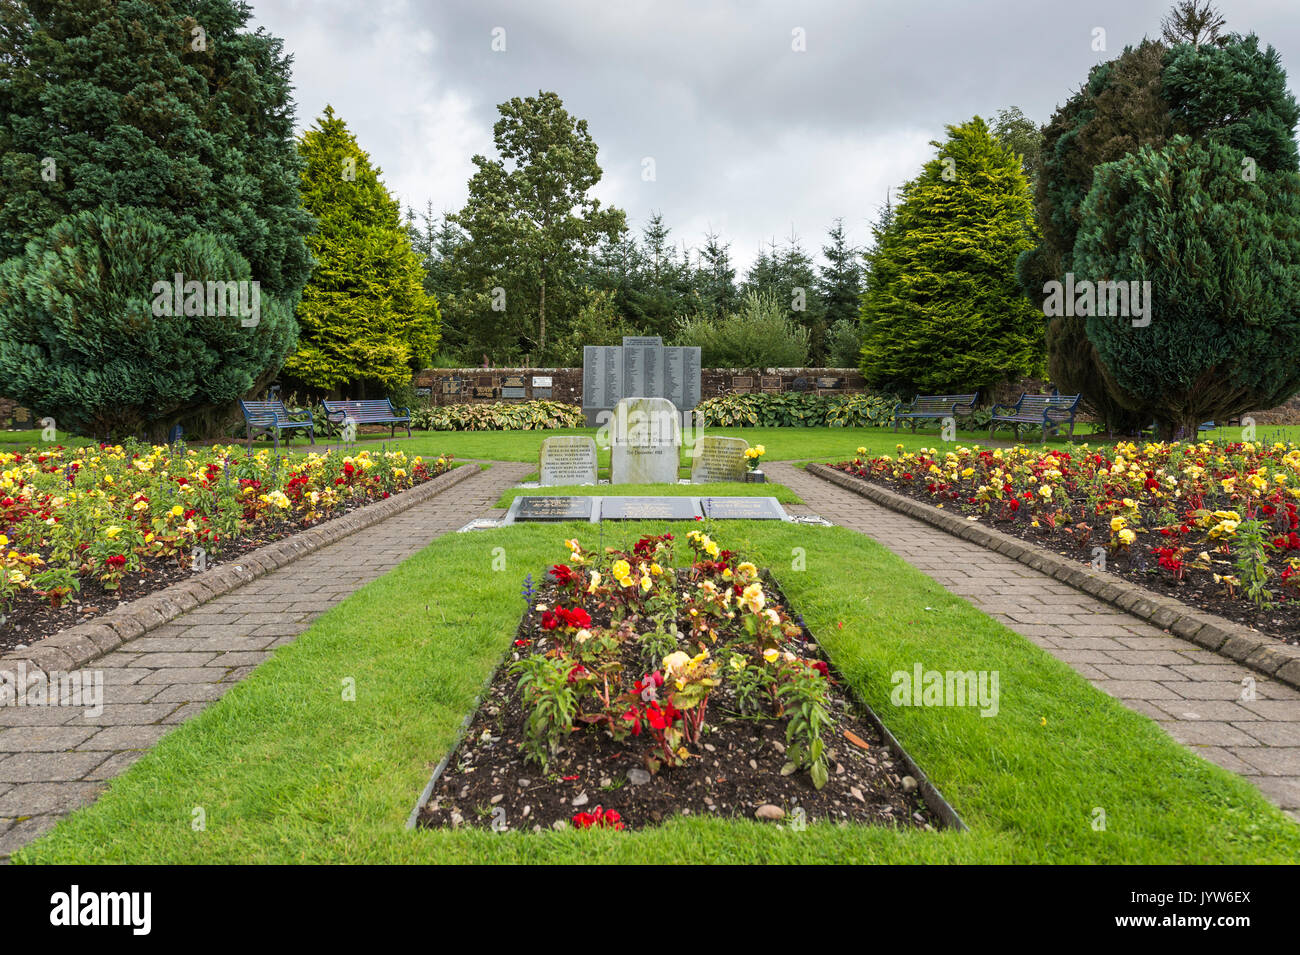 Lockerbie, Scotland, UK - August 19, 2017: The garden of remembrance for the victims of the Lockerbie air disaster in Dryfesdale cemetery, Lockerbie.  Stock Photo